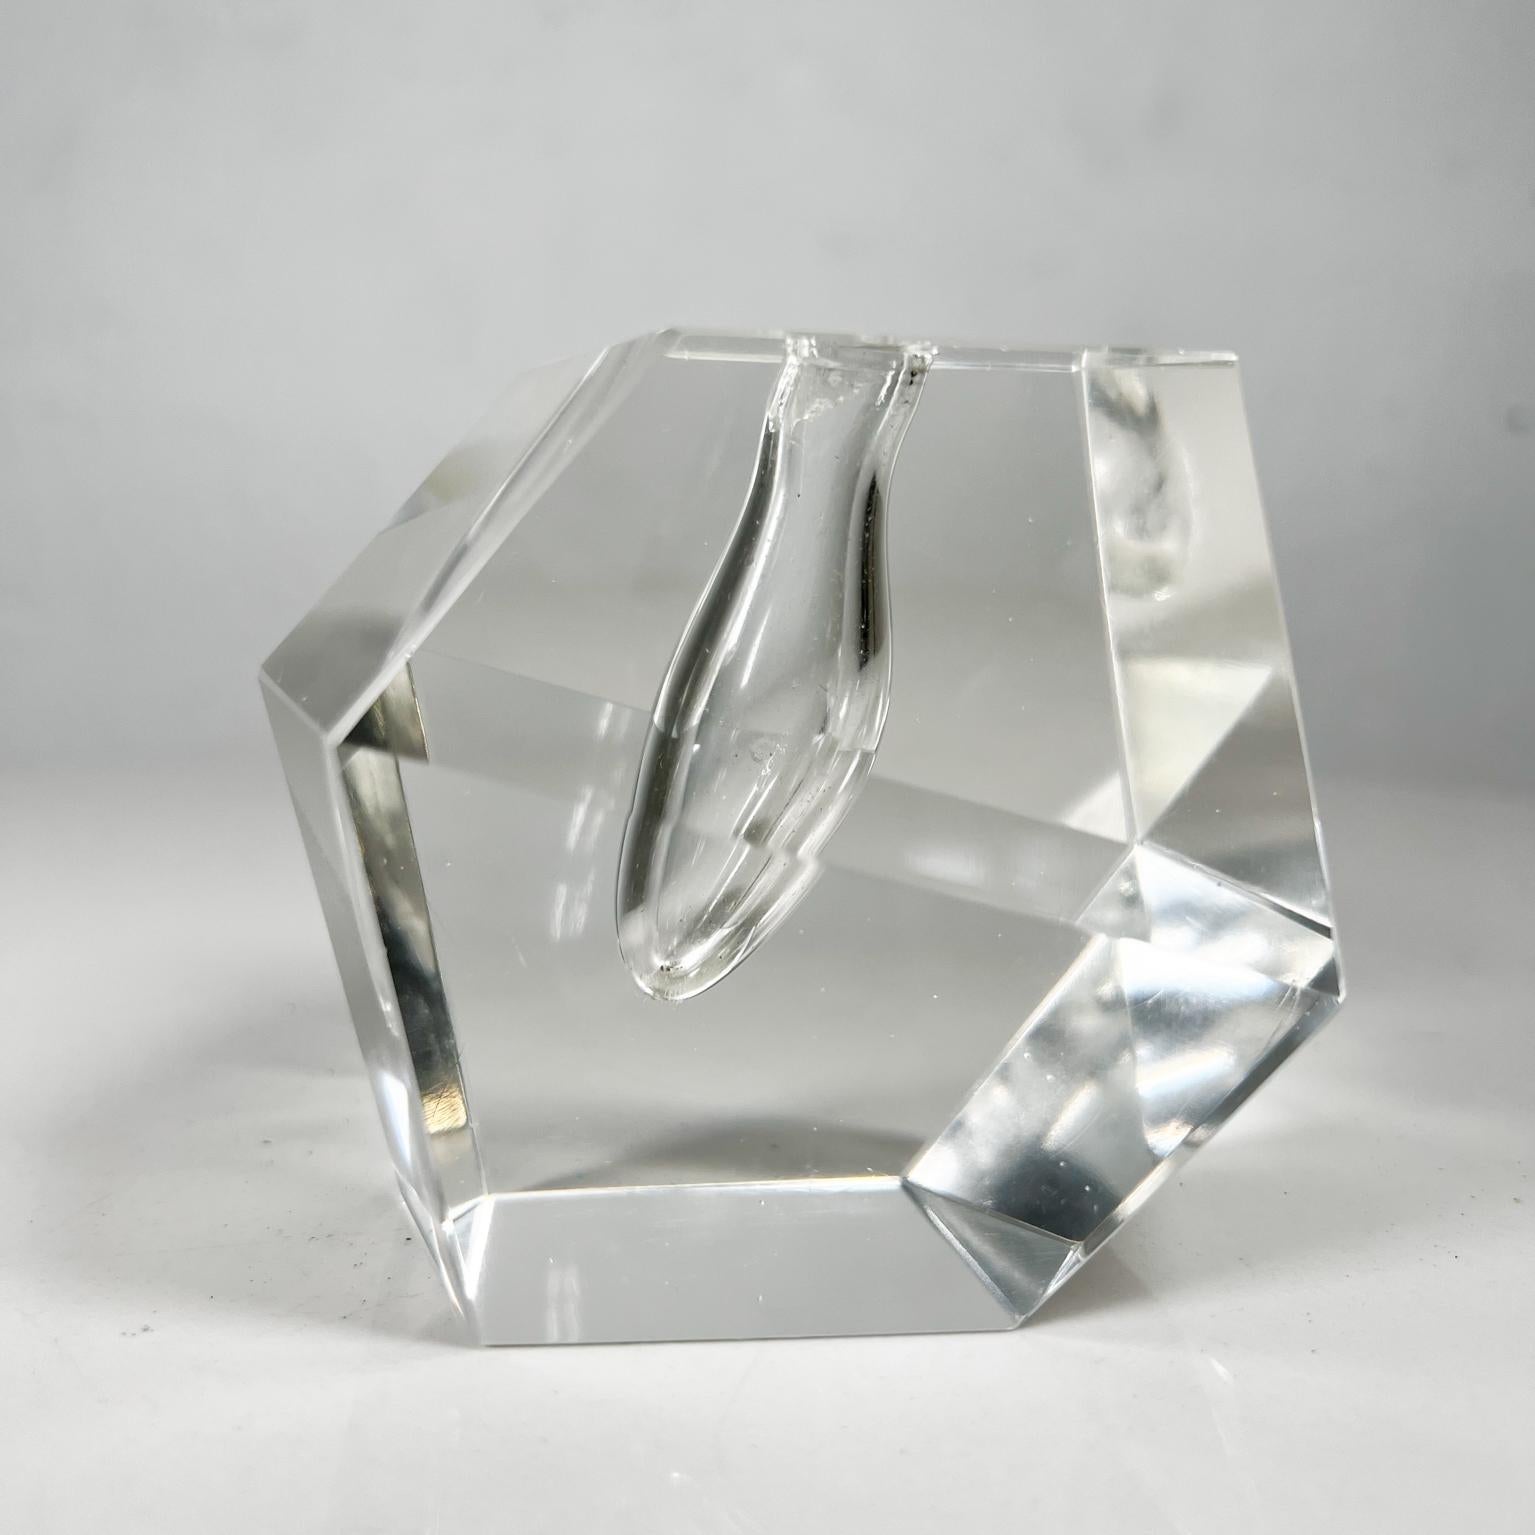 1960s Faceted crystal orchid bud vase art glass paperweight.
Unmarked
Measures: 4 deep x 2.75 wide x 3 tall
Original vintage preowned.
Refer to images.